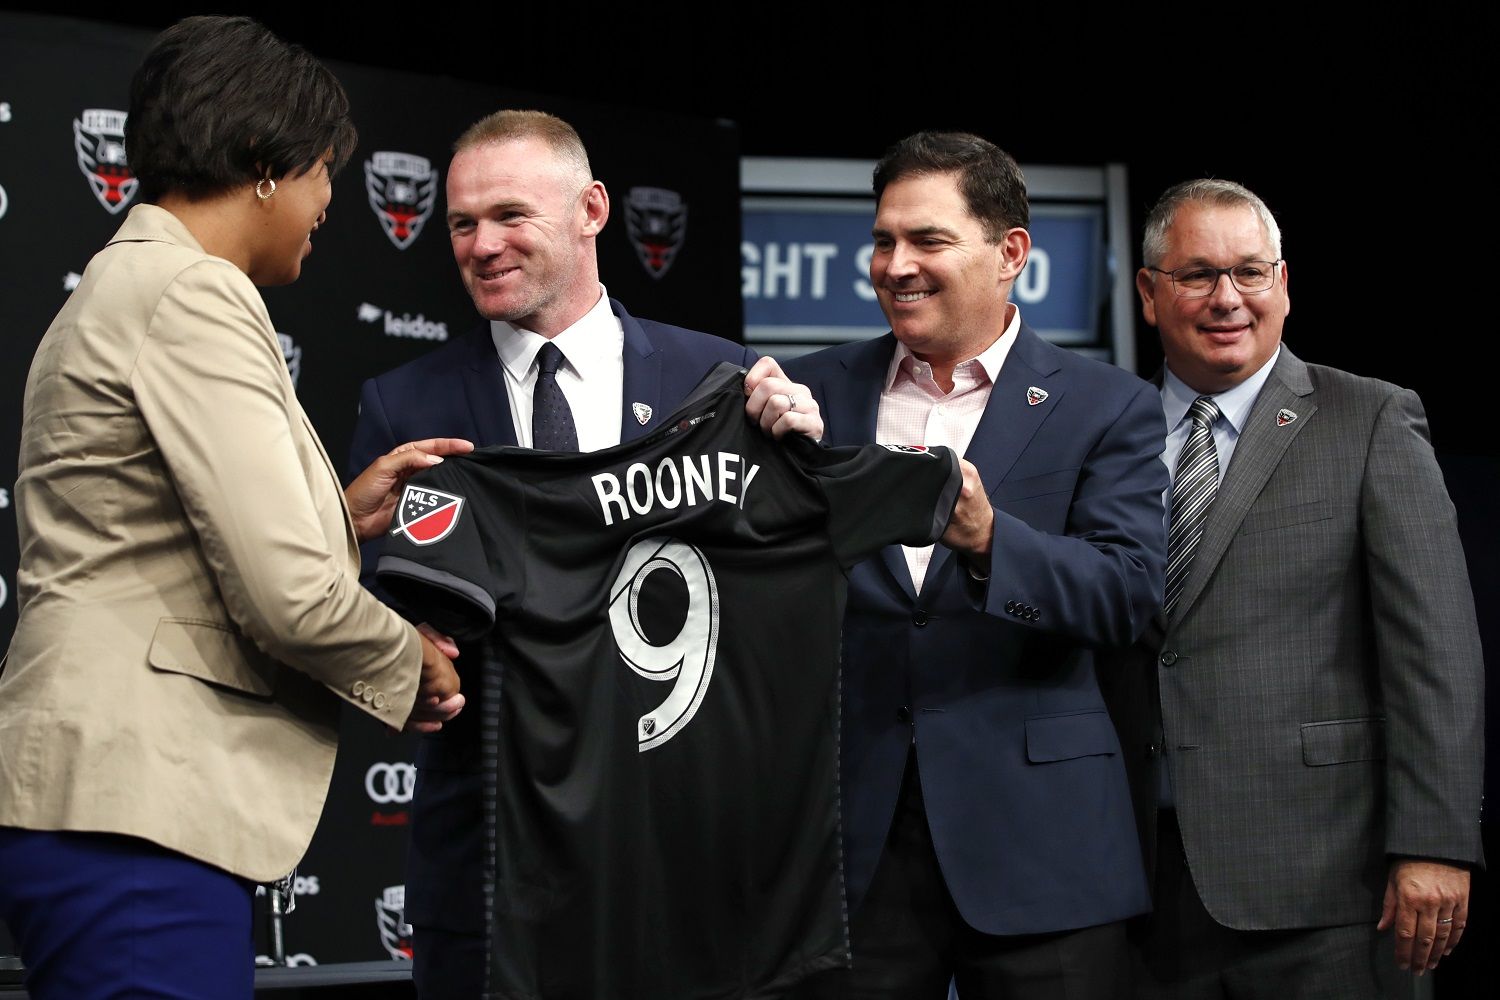 District of Columbia Mayor Muriel Bowser, left, shakes hands with English soccer star Wayne Rooney, the all-time leading scorer for England's national team and Manchester United in the Premier League, as he holds up his new jersey next to MLS team D.C. United Managing Partner and CEO Jason Levien, and Dave Kasper, General Manager and Vice President of Soccer Operations, right, during a news conference announcing Rooney's signing with D.C. United, Monday, July 2, 2018, at the Newseum in Washington. (AP Photo/Jacquelyn Martin)